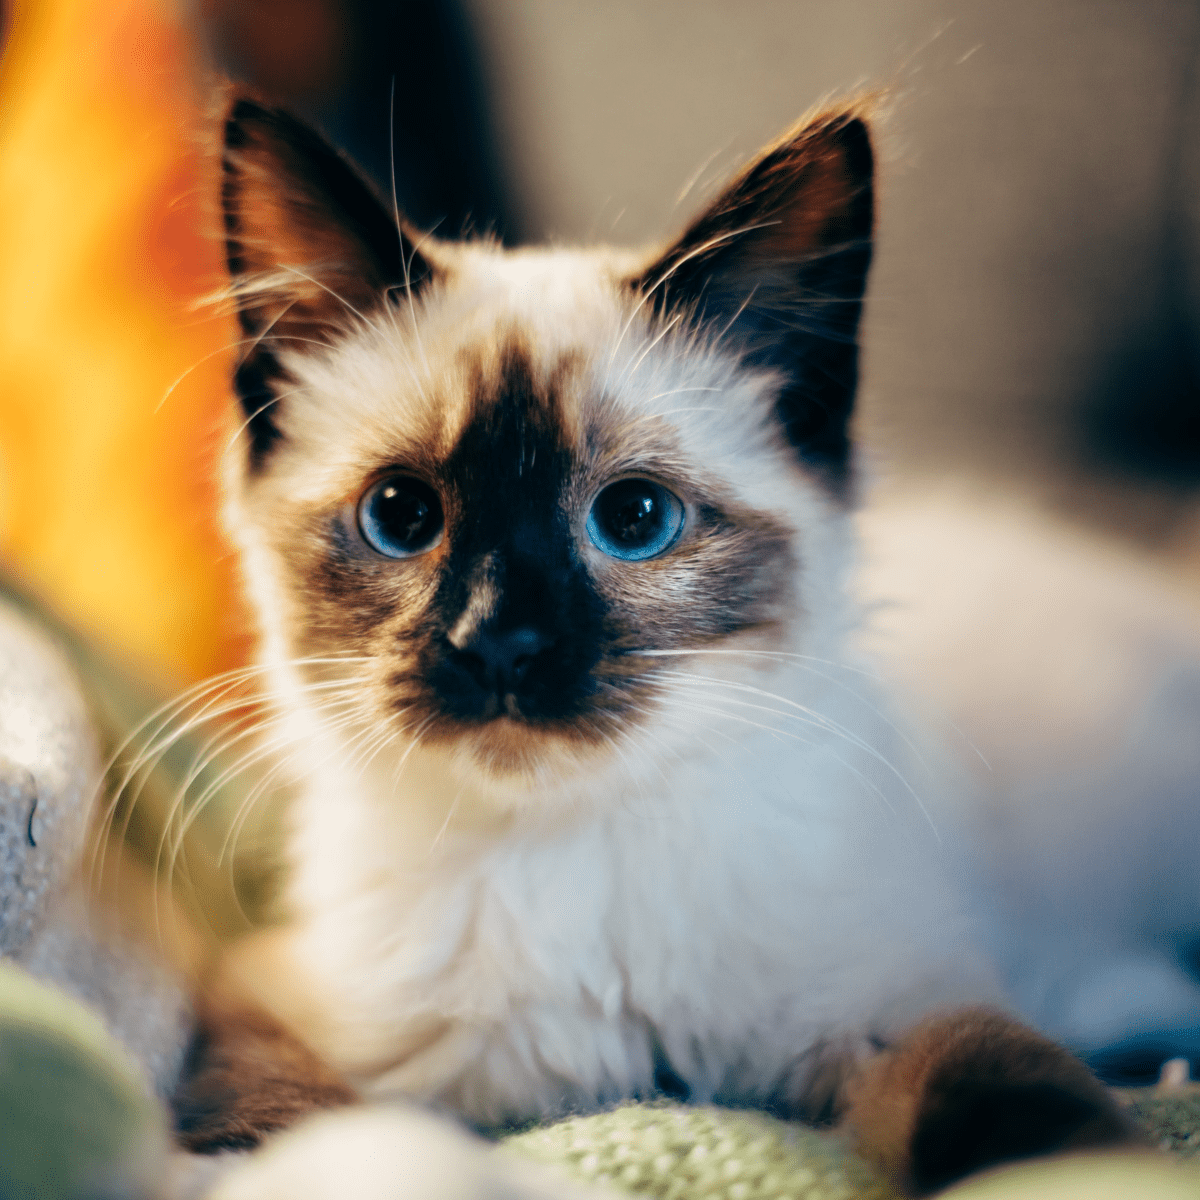 The Cutest Cat Breeds In 2019  Cat memes, Funny animals, Cute cats